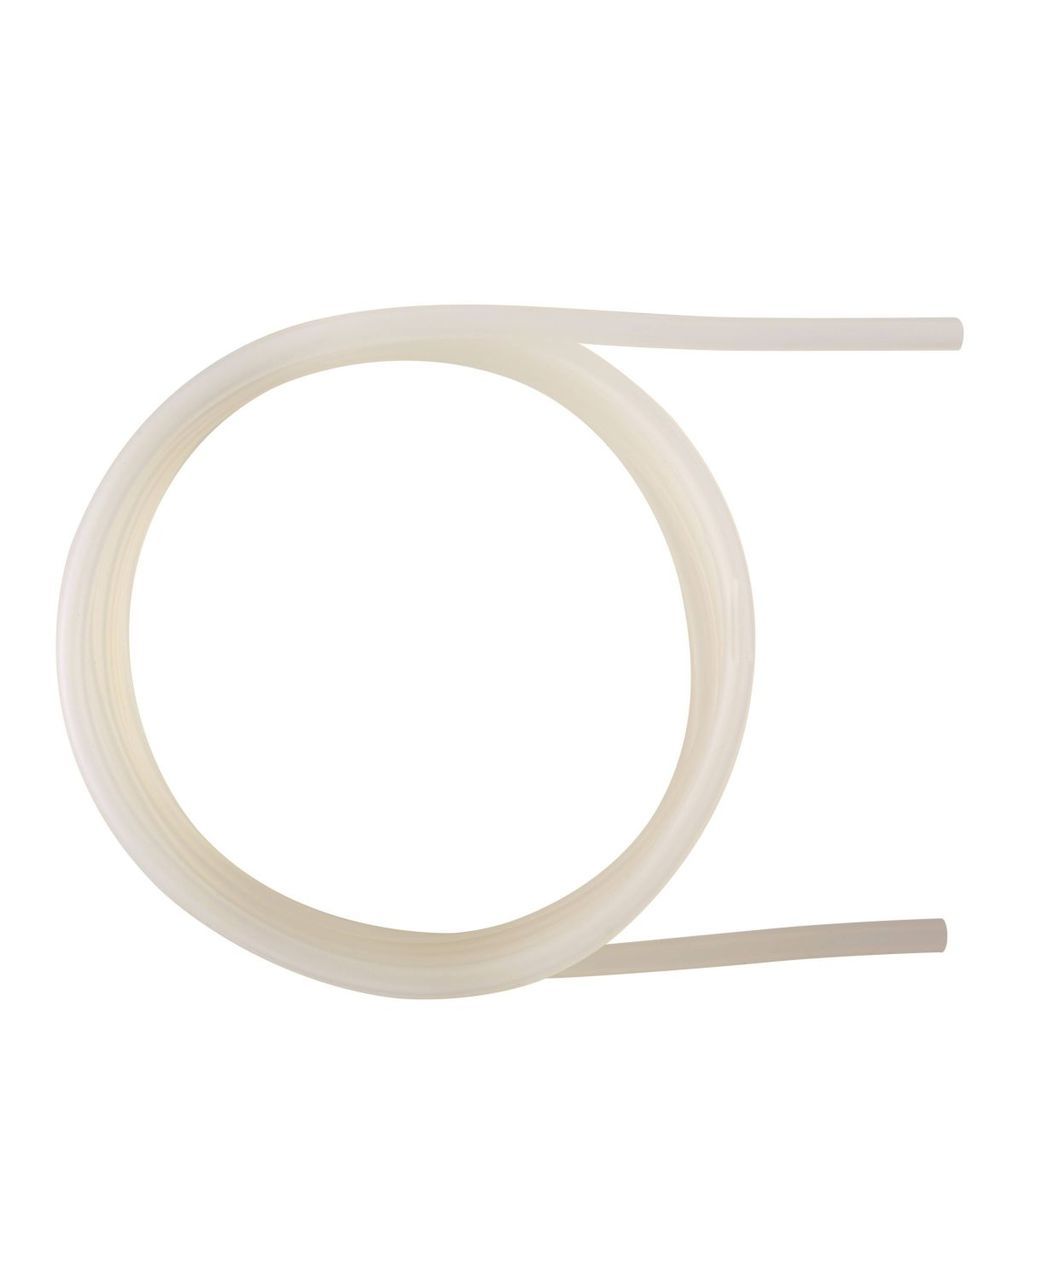 products-0554-0440_silicone_connection_hose__31375.1529421974.1280.1280.jpg